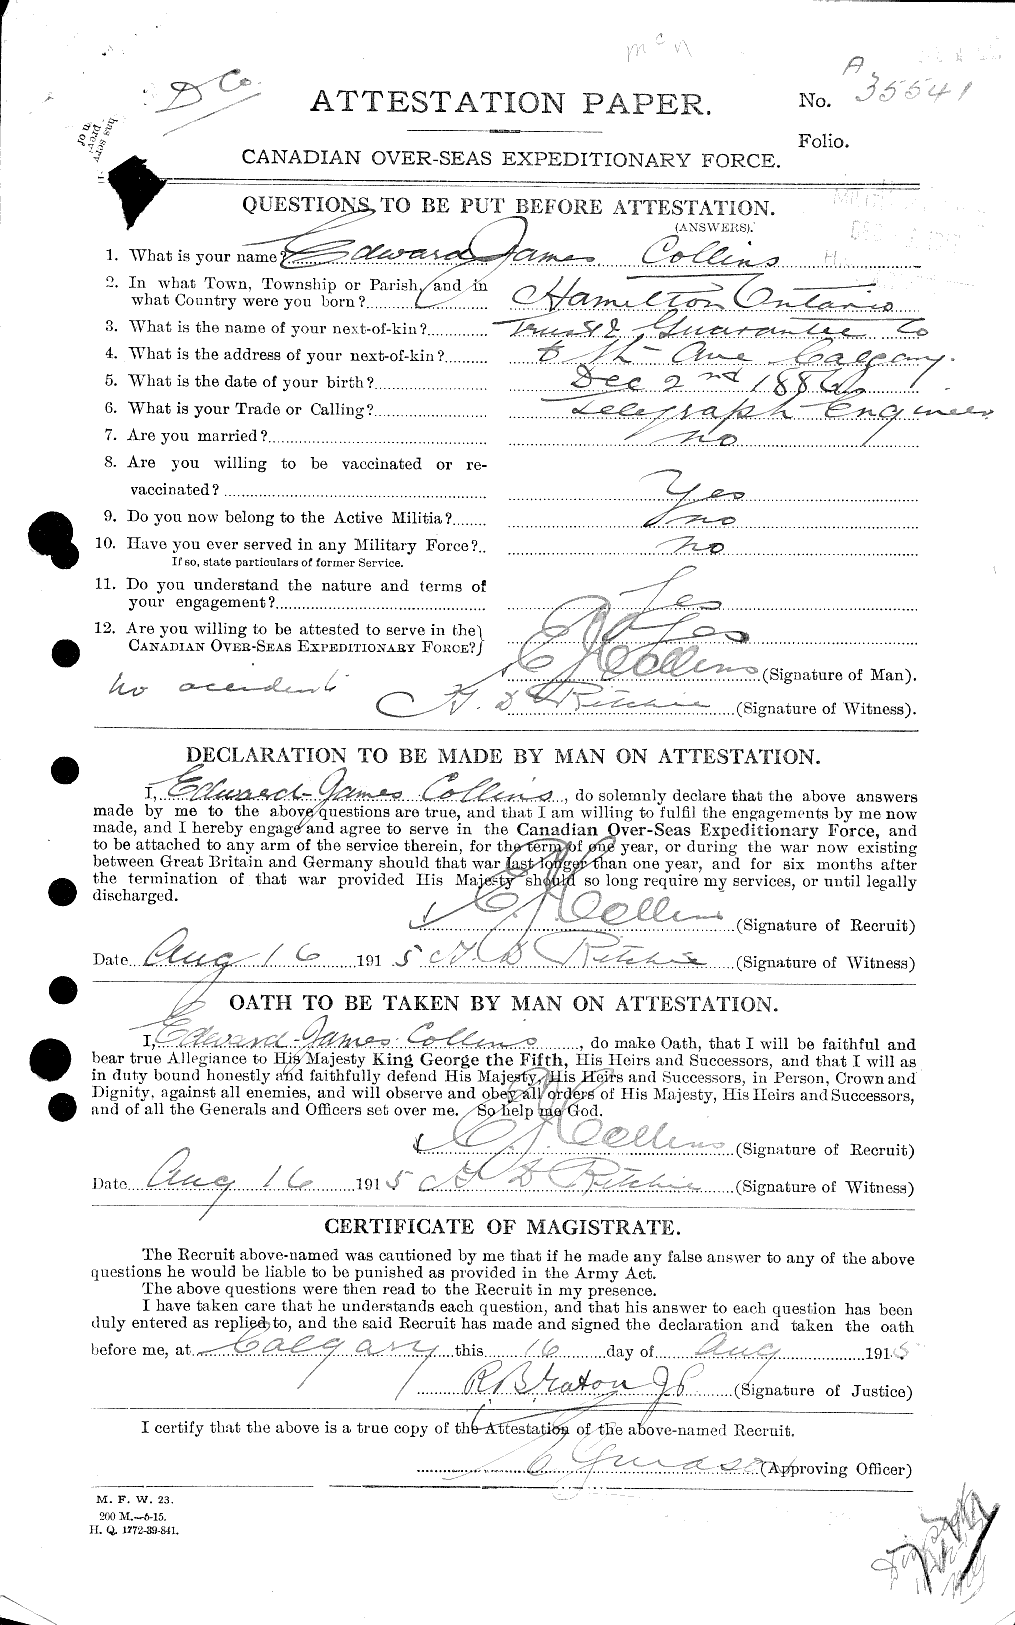 Personnel Records of the First World War - CEF 037755a